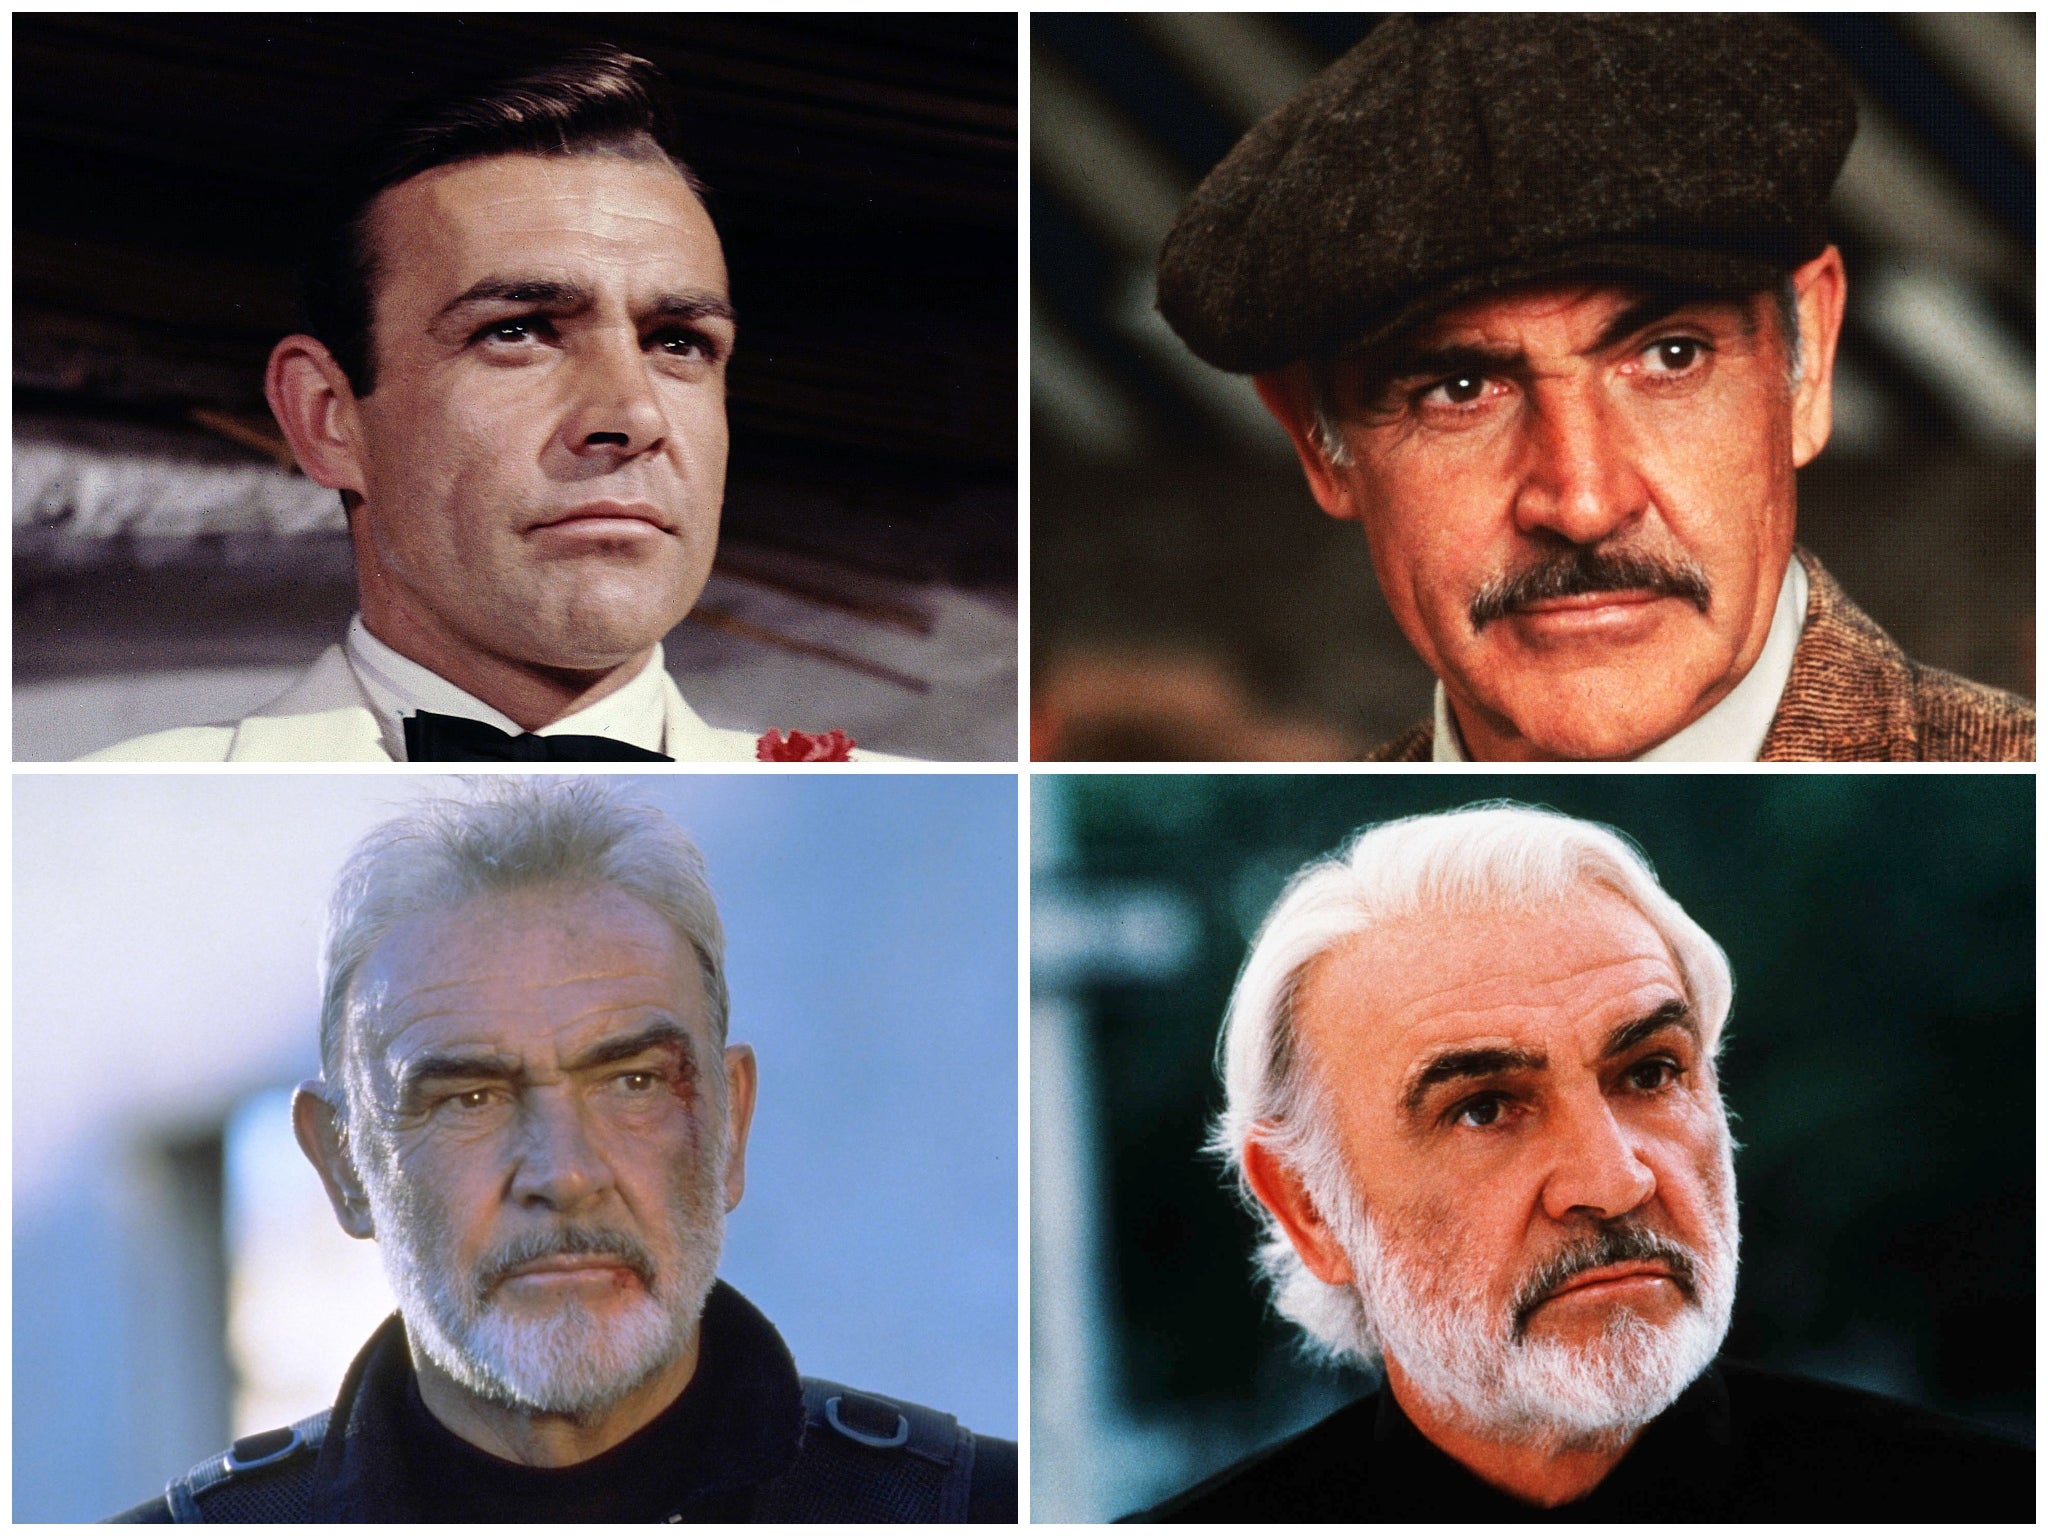 The Independent runs through Sean Connery’s greatest screen roles